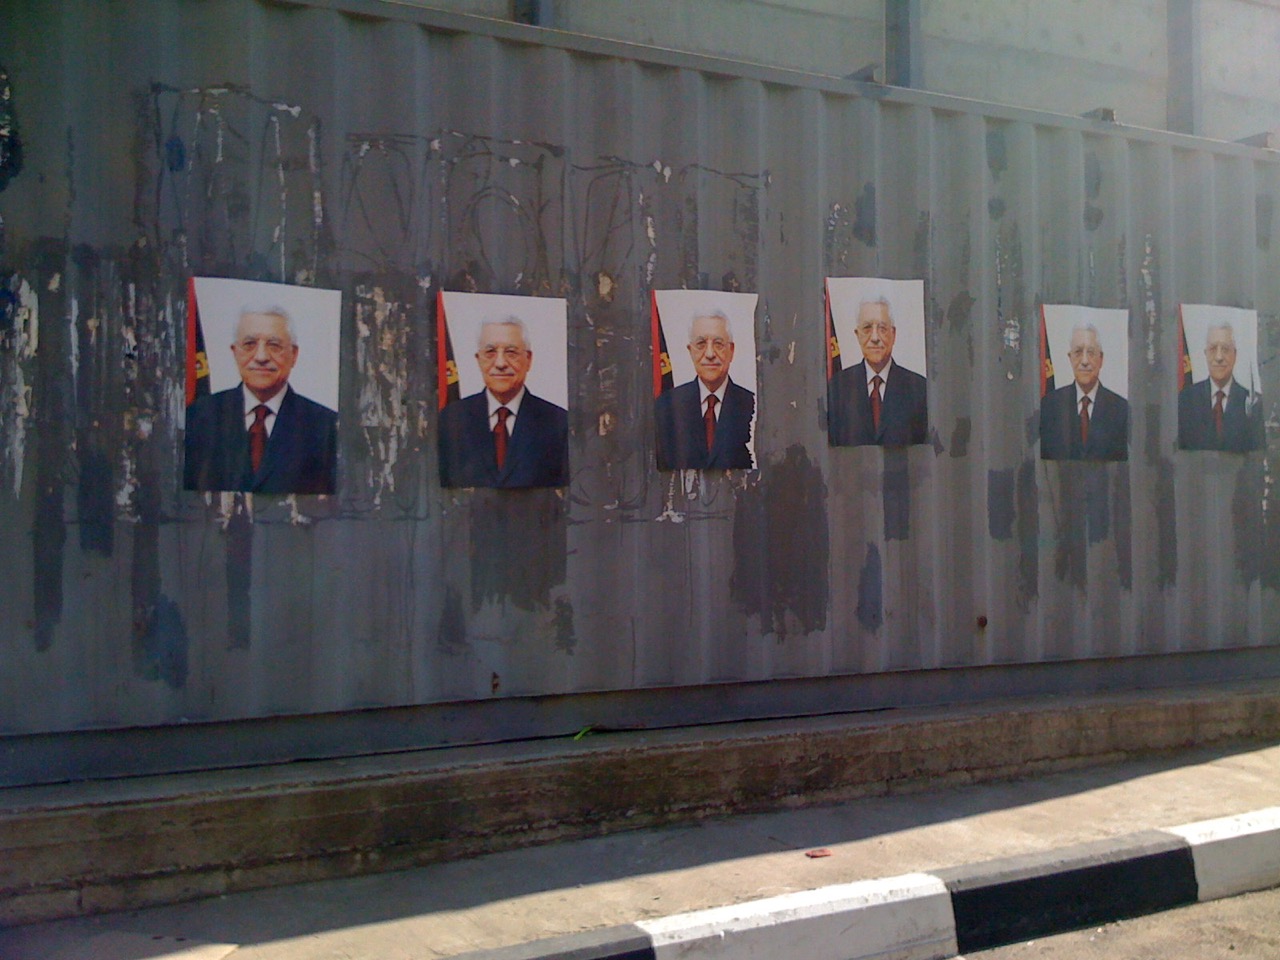 The 2012 Local Elections in the West Bank: a Display of Discreet Authoritarianism?